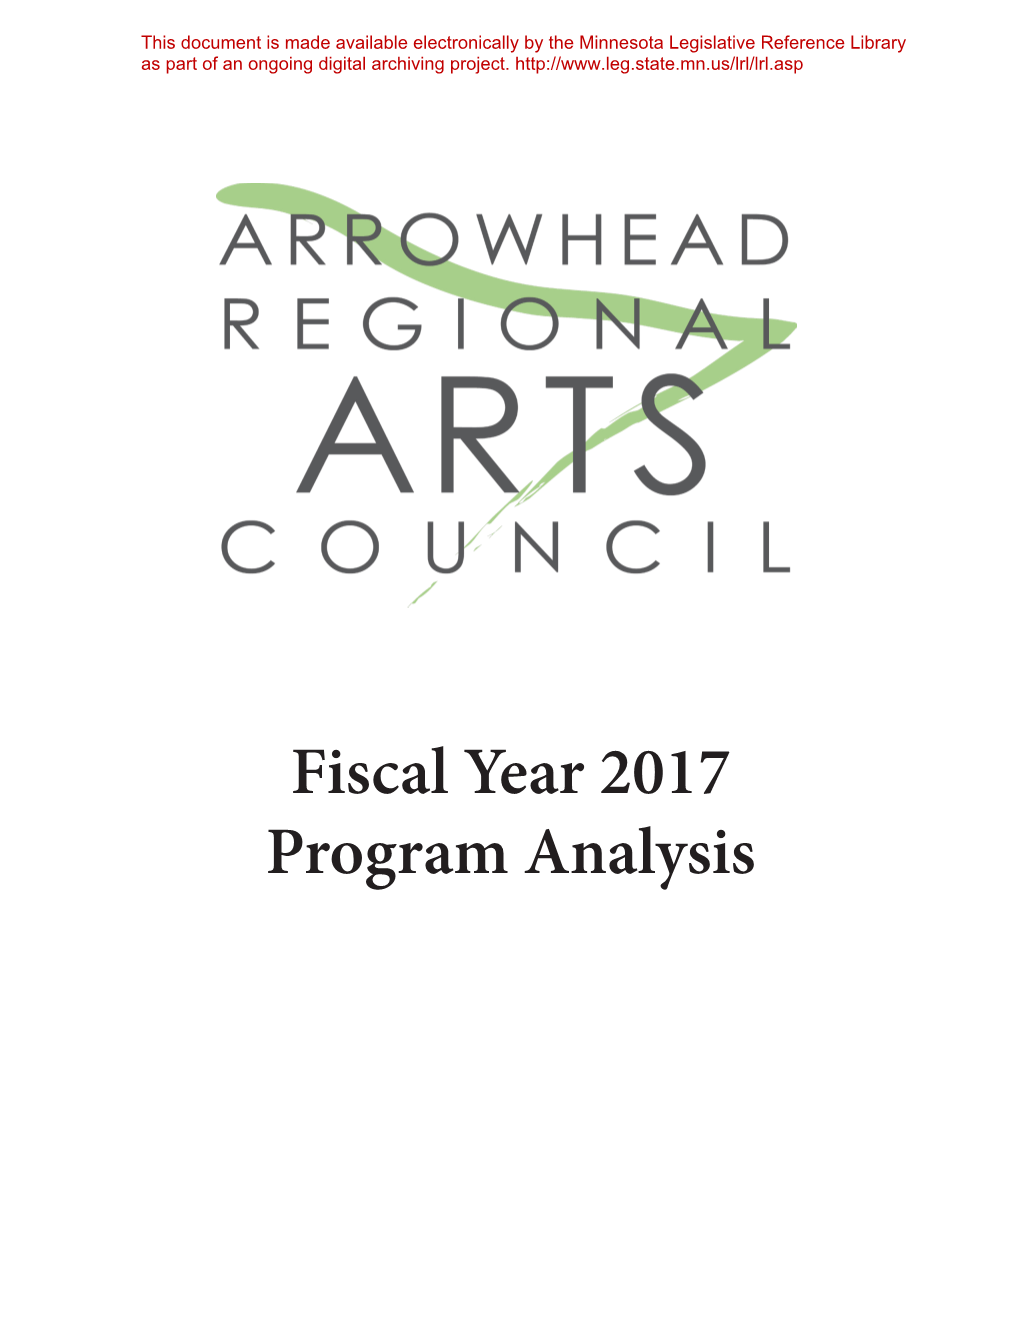 Fiscal Year 2017 Program Analysis Mission Statement the Arrowhead Regional Arts Council’S Mission Is to Facilitate and Encourage Local Arts Development